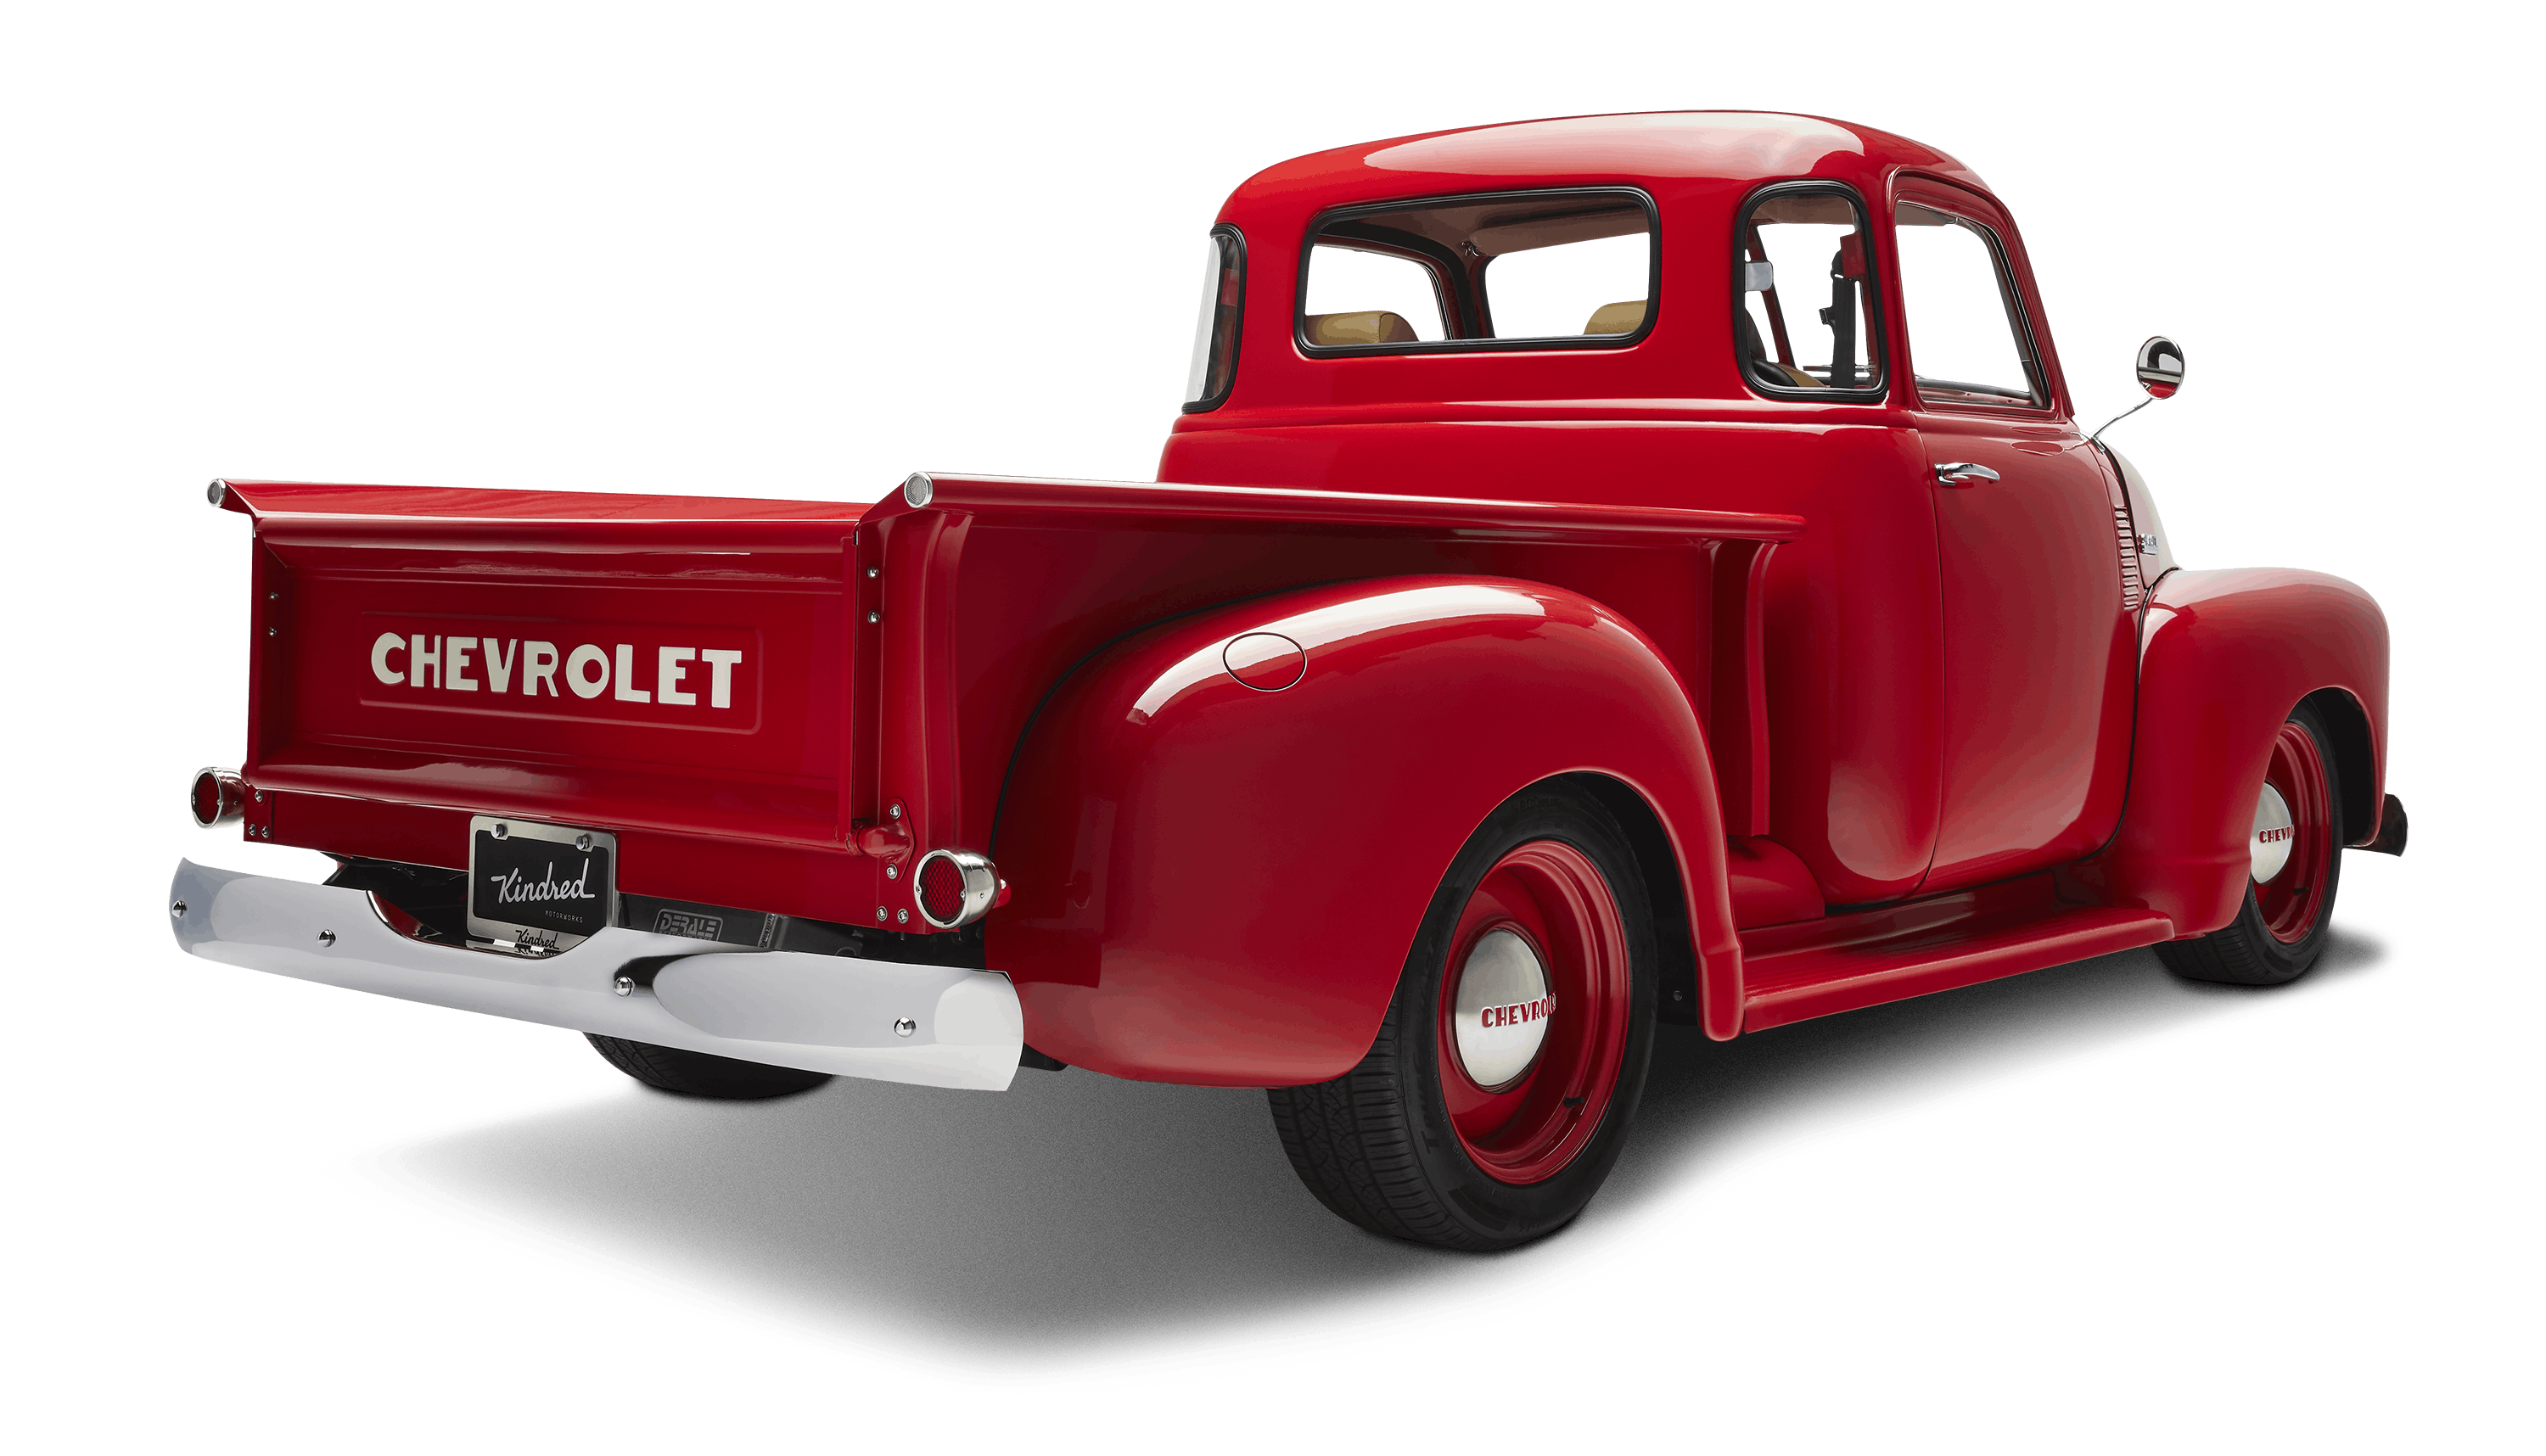 Vintage Chevy Truck: Modern Take on Chevy 3100 Truck